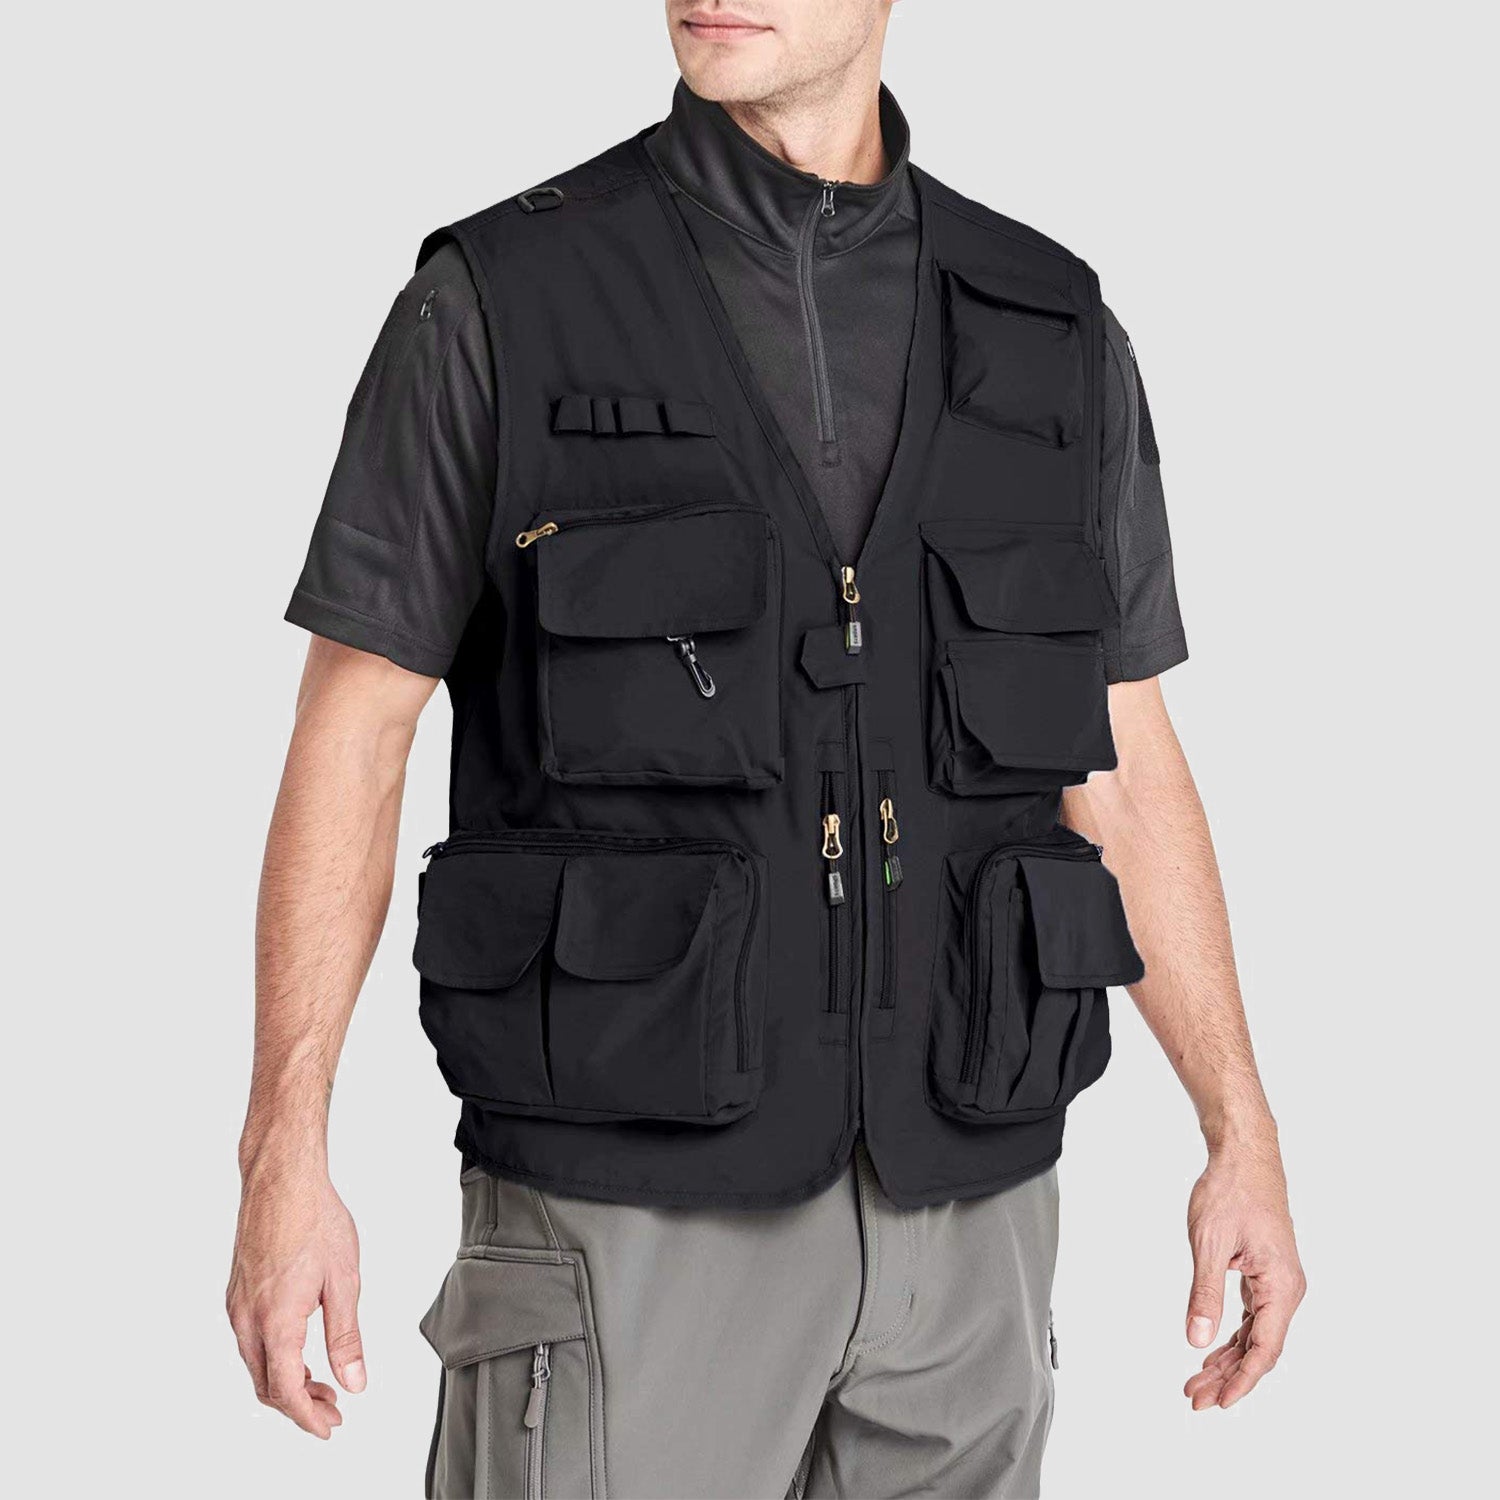 Men's Outerwear Vests Mesh Sleeveless Outdoor Work Vest with Multi Pockets Cargo Waistcoat Fishing